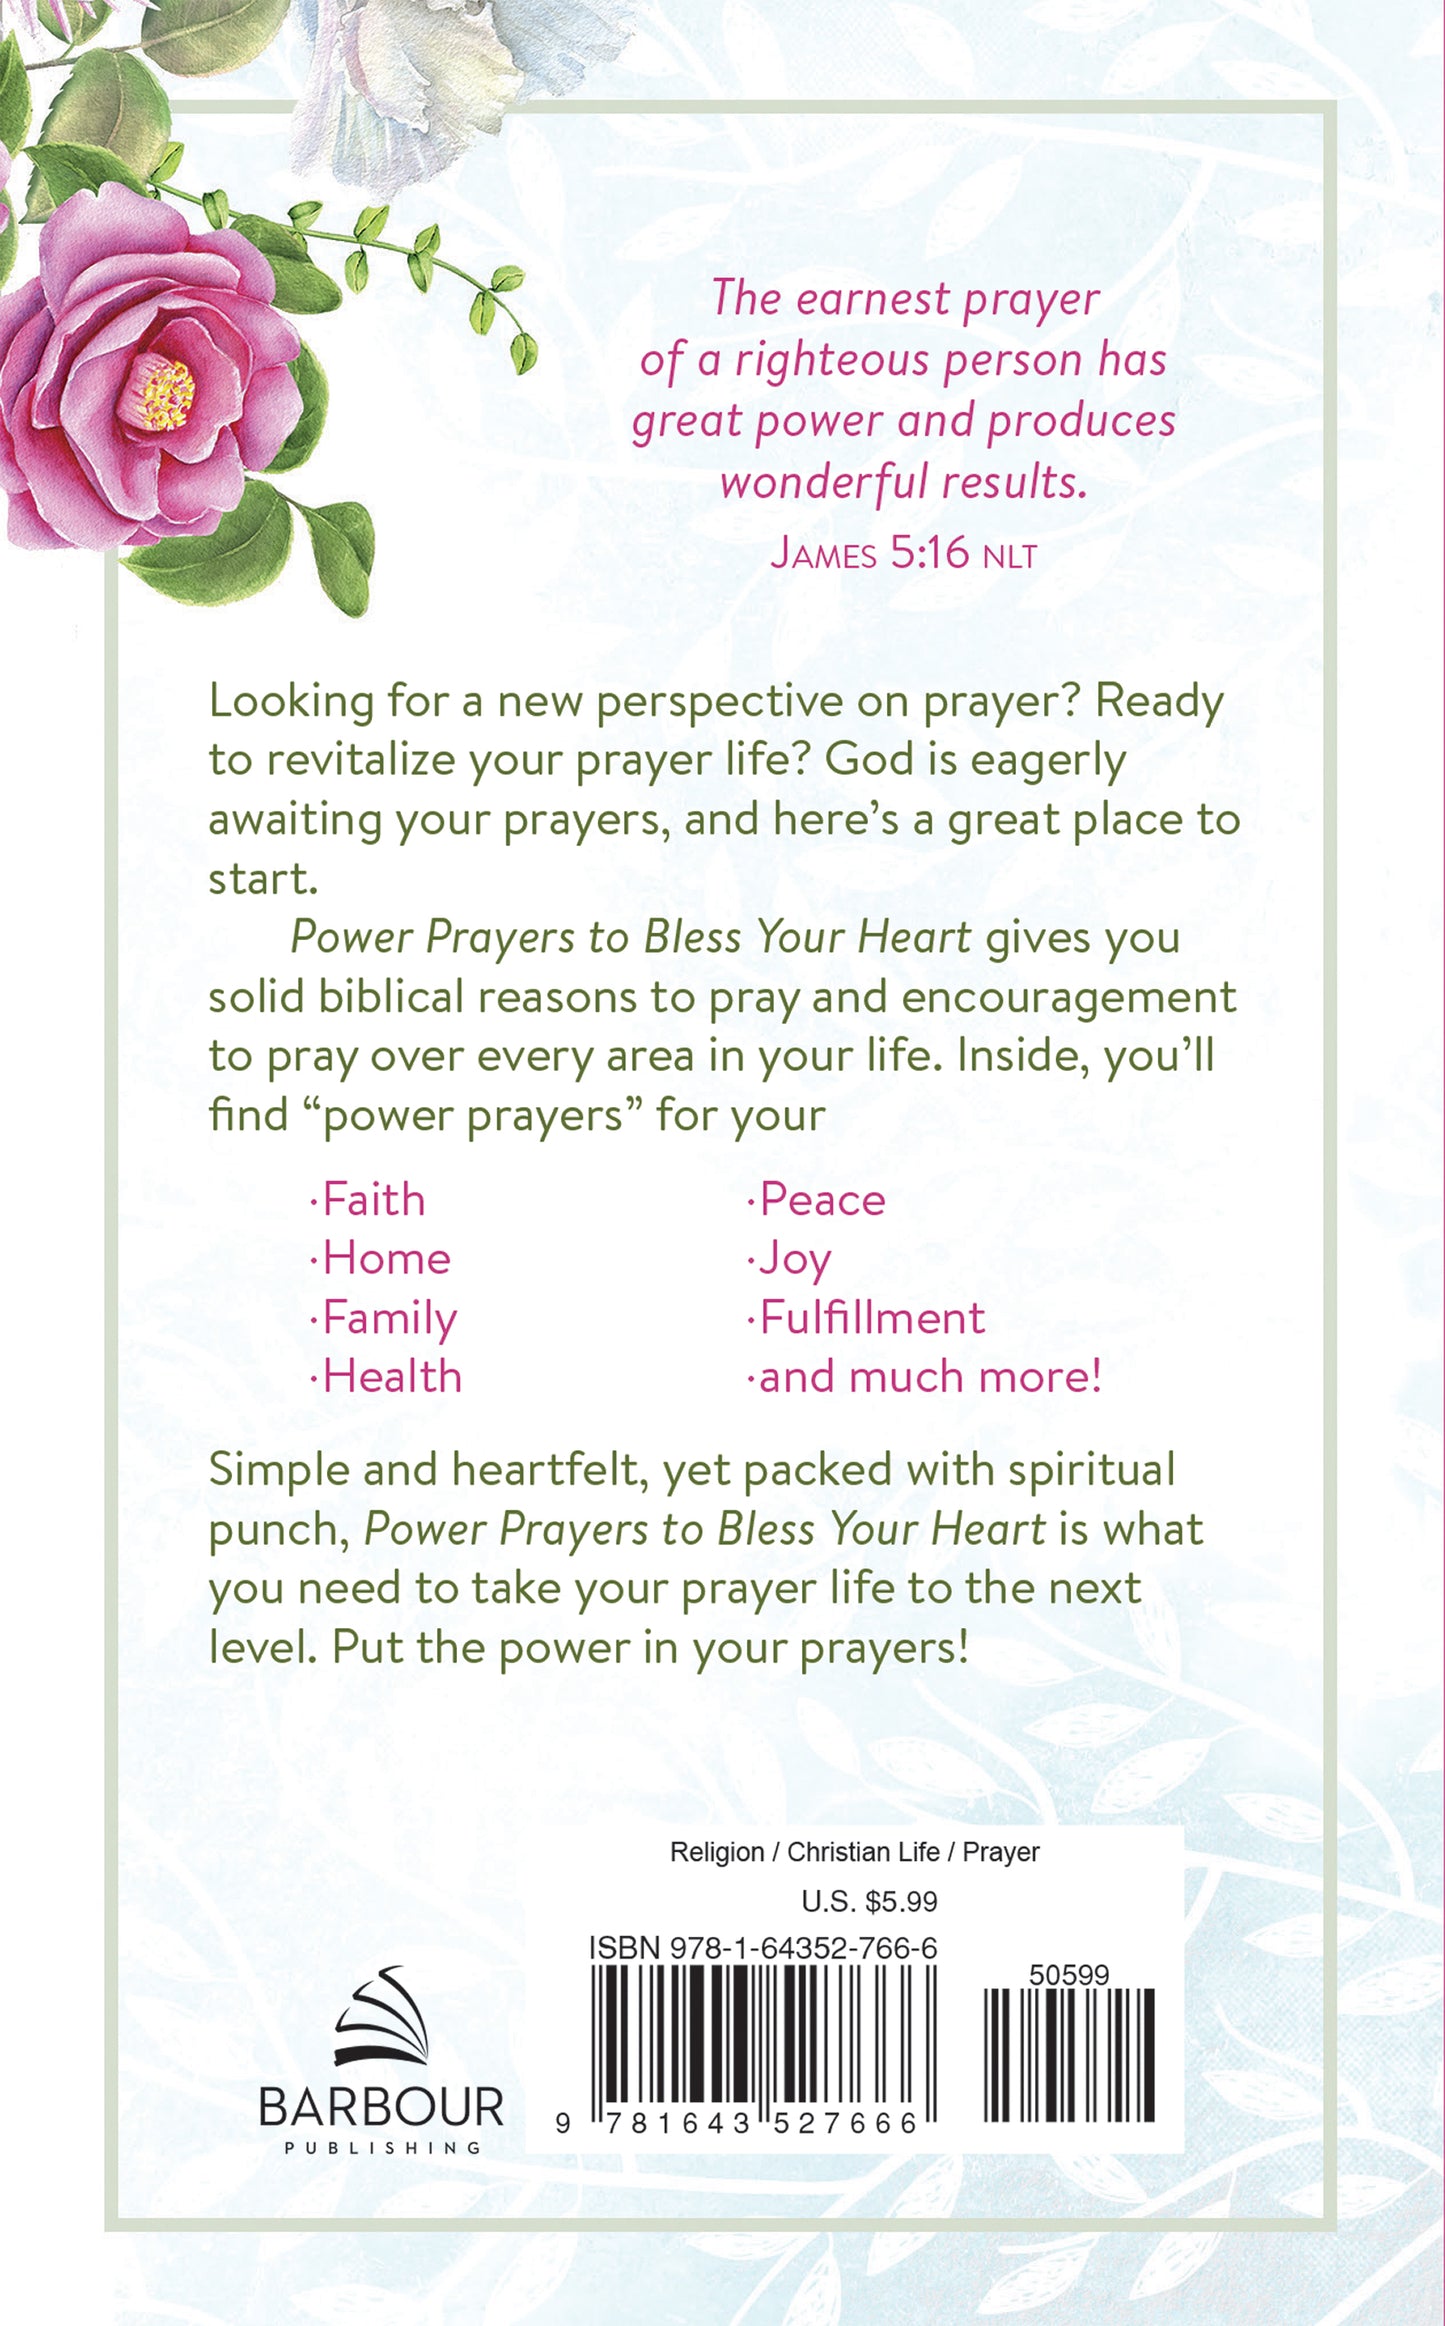 Power Prayers to Bless Your Heart - The Christian Gift Company